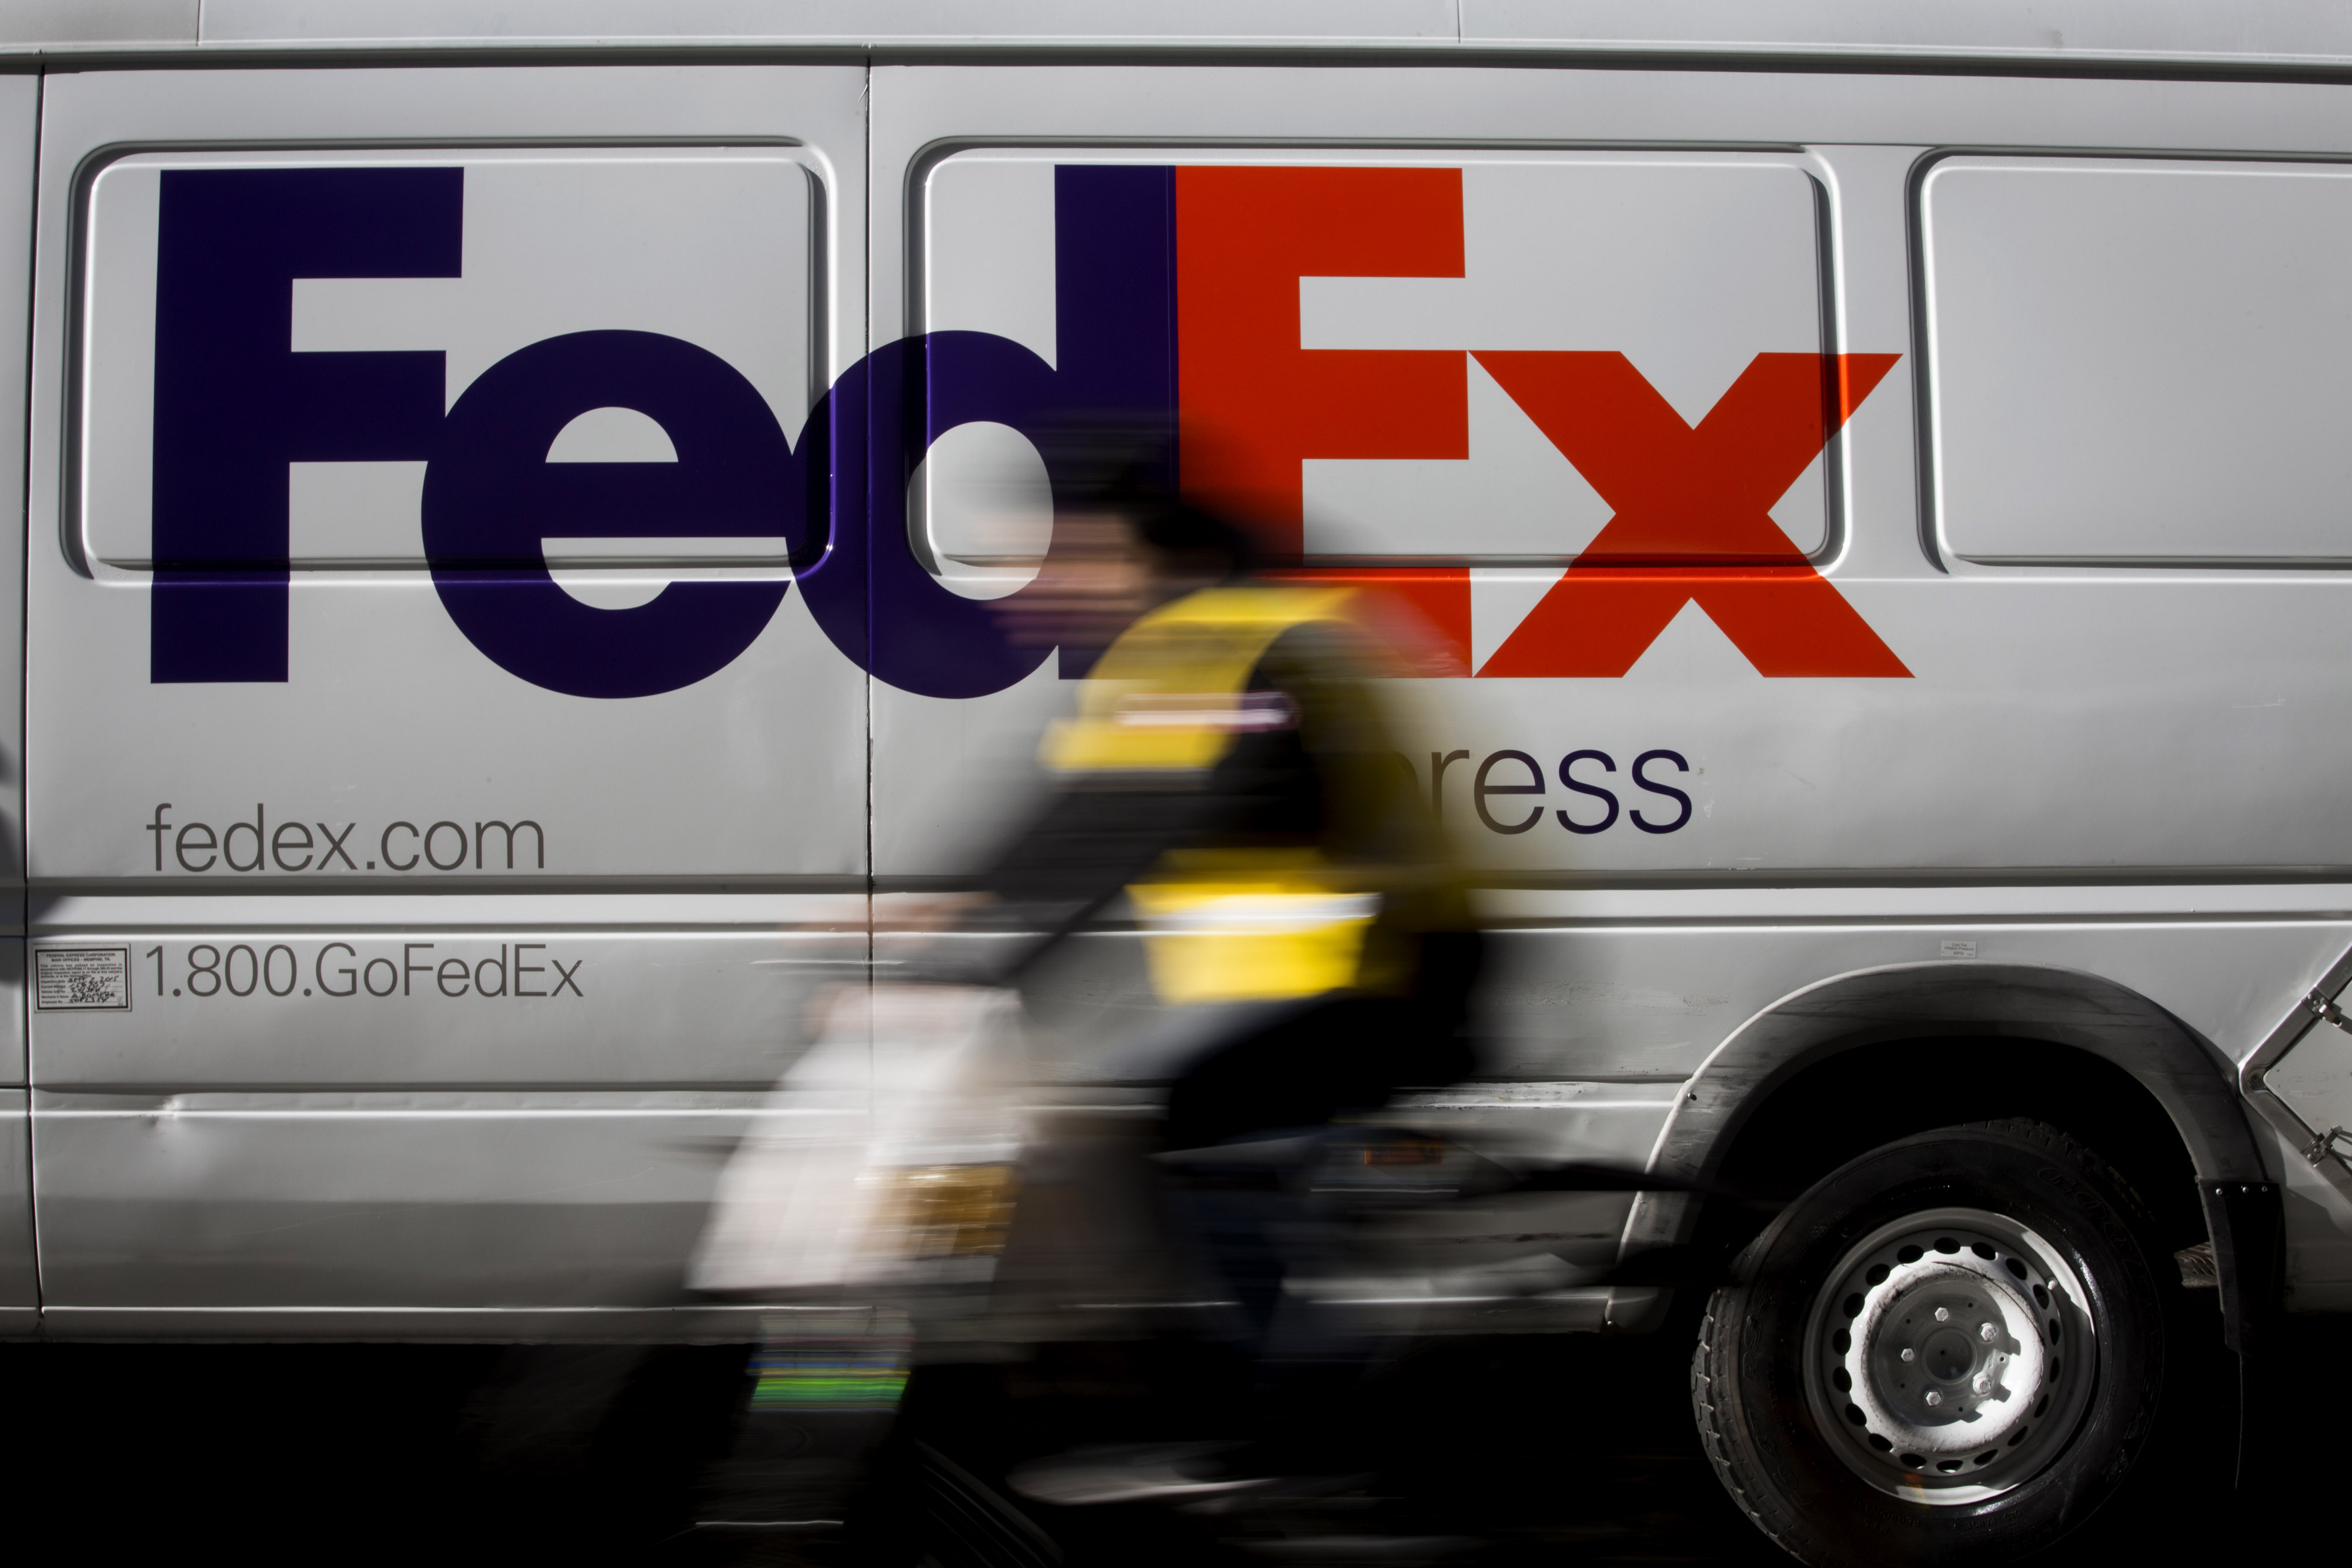 There's a FedEx Holiday Email Scam Going Around. Here's How to Protect Yourself